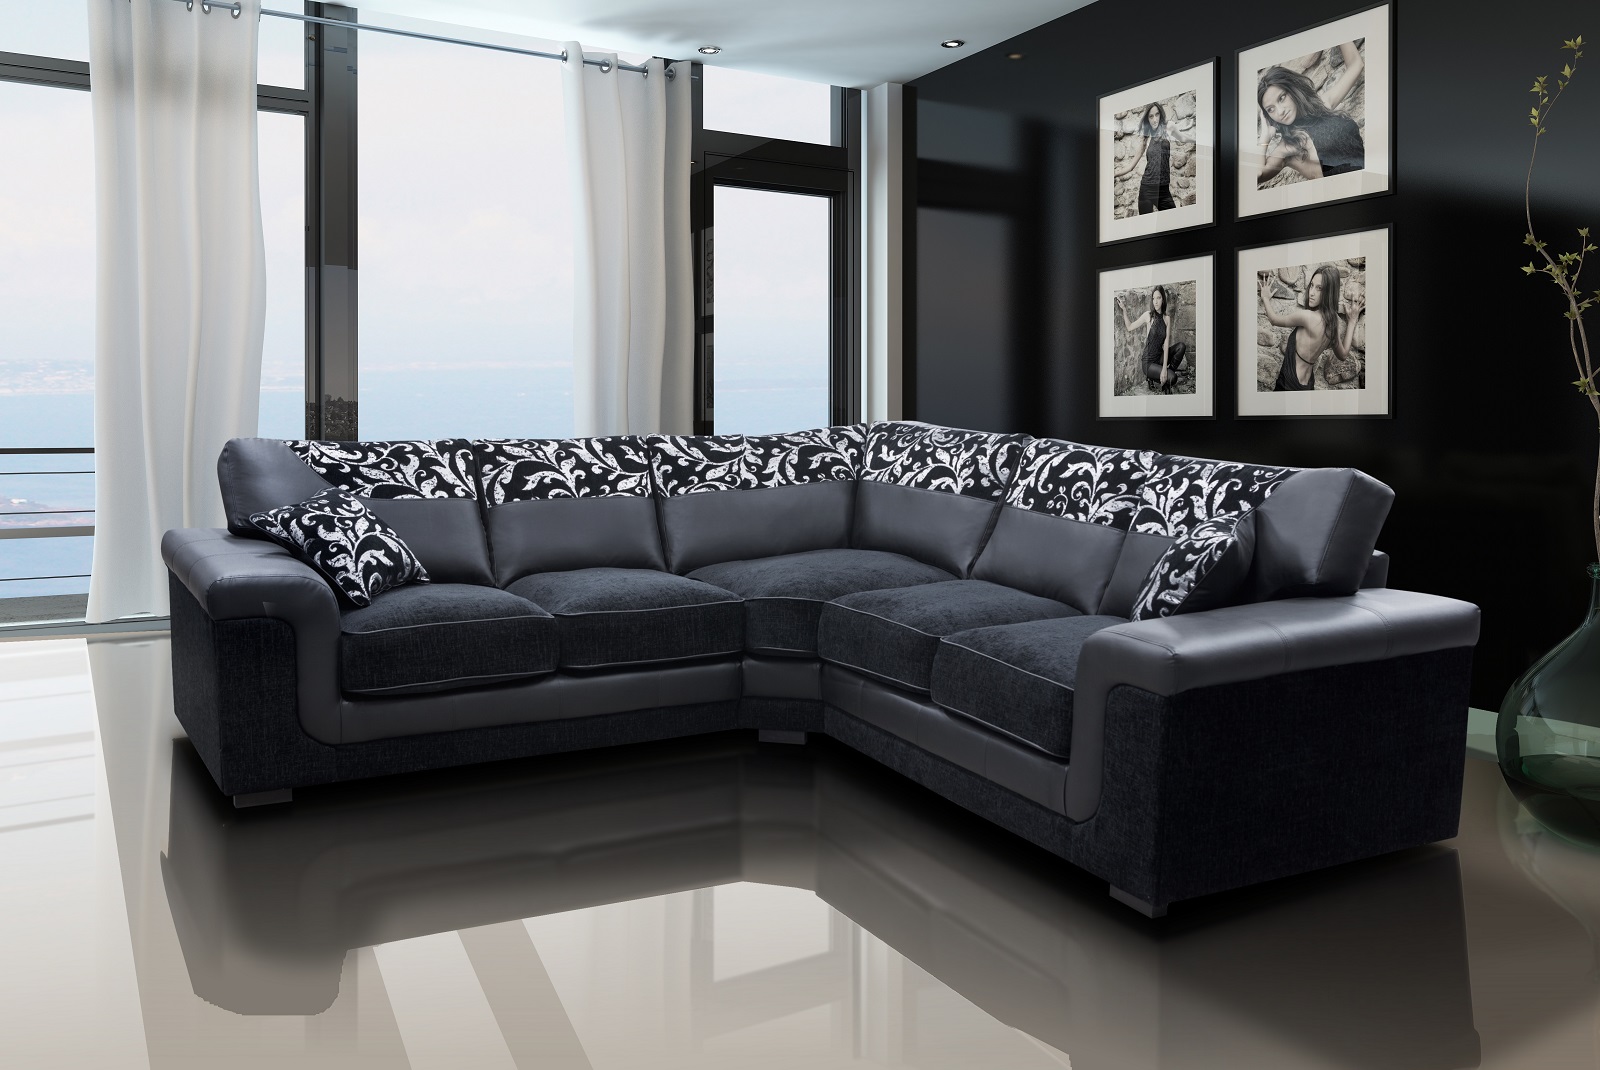 Glass Couch Tables - Replace Their Glass With Tempered Glass